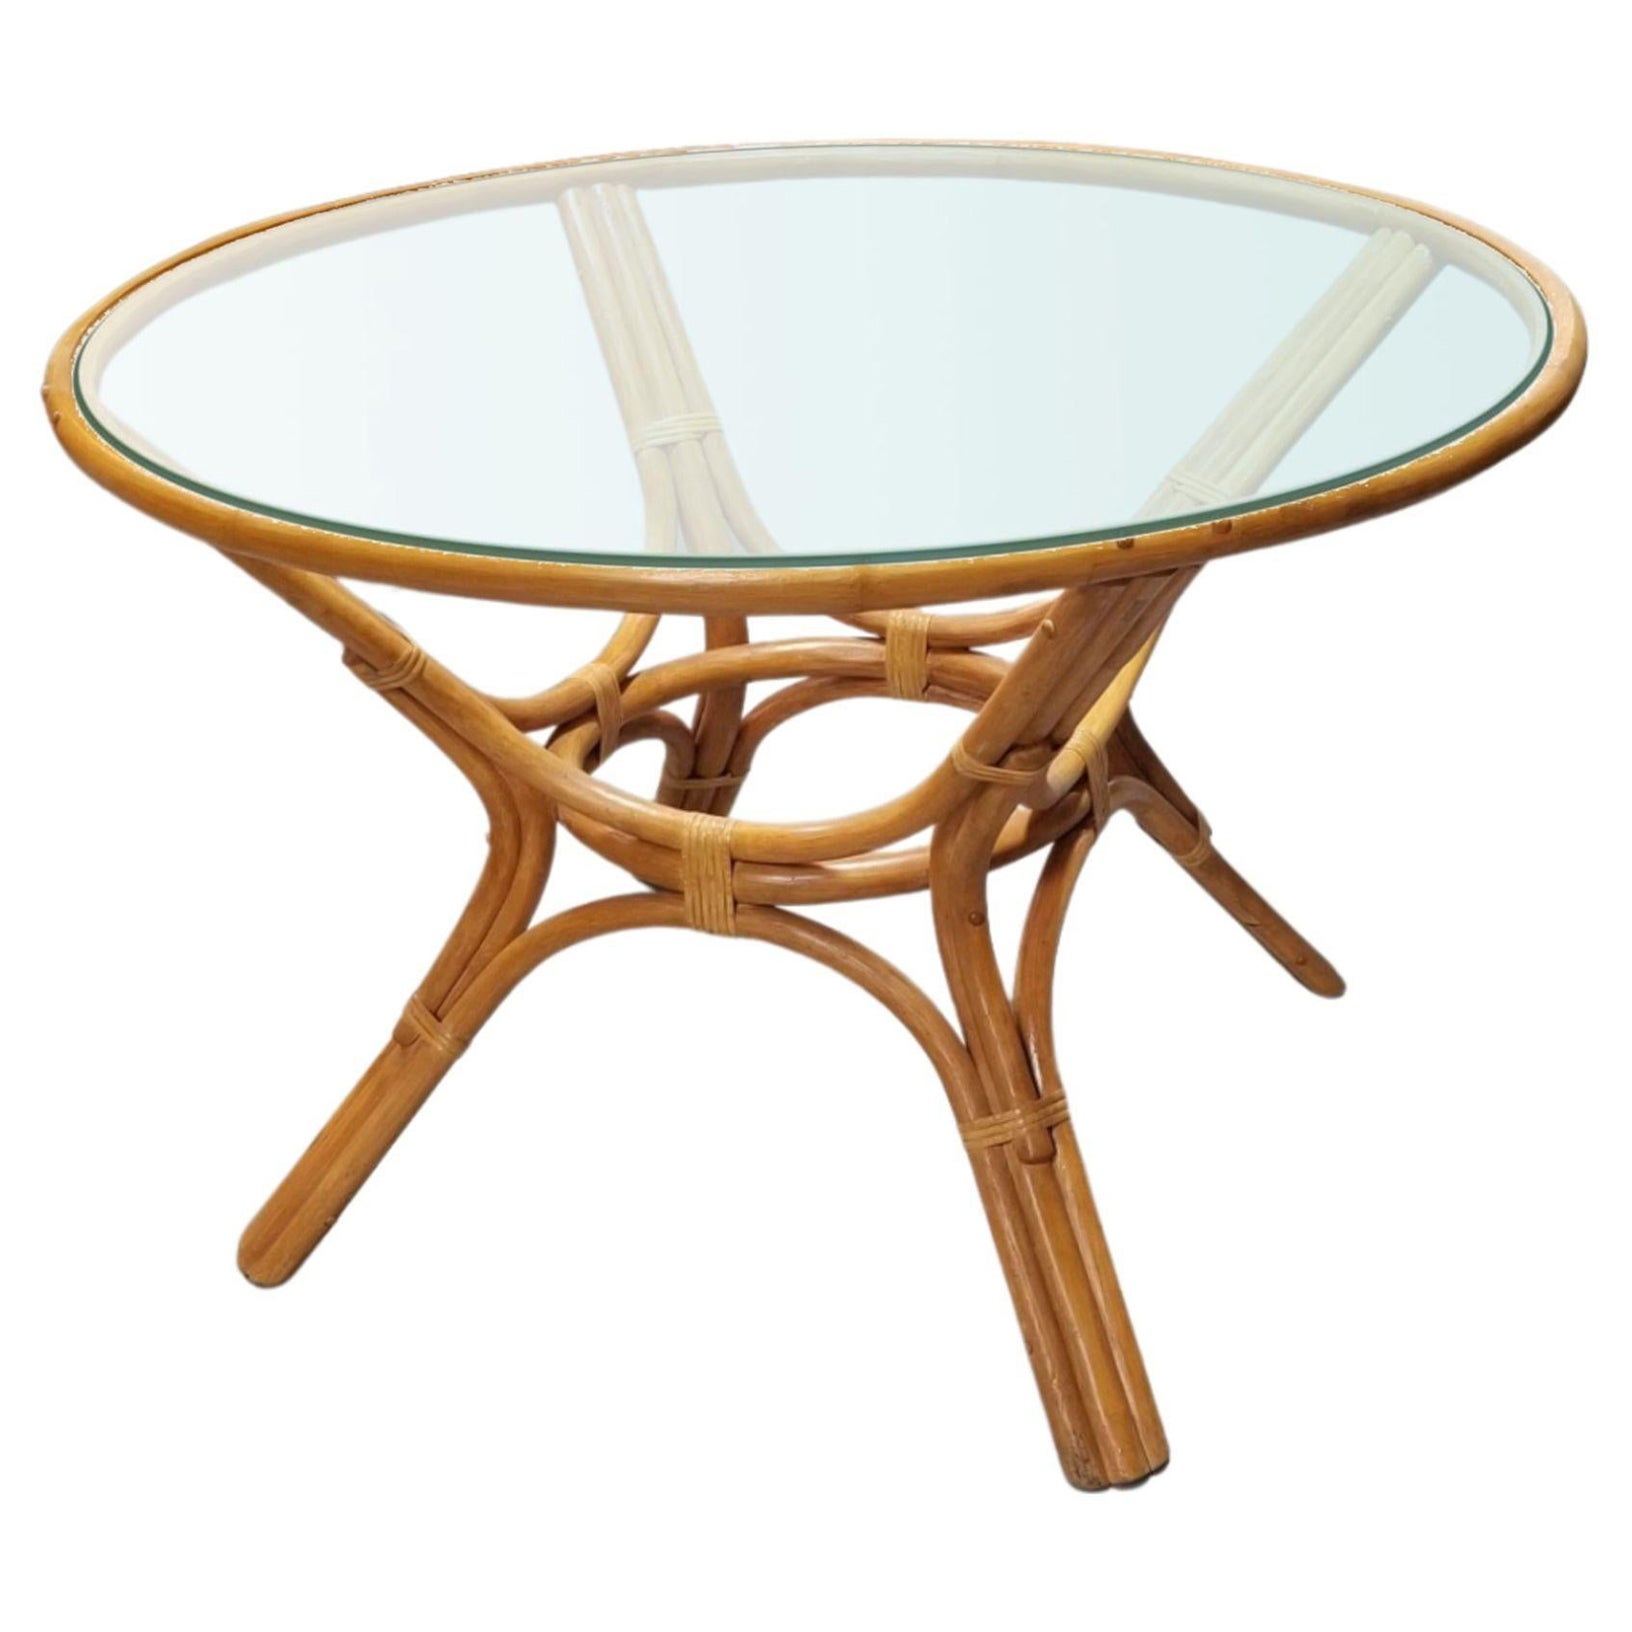 Restored 3-Strand Rattan Round Dining Table with Glass Top For Sale